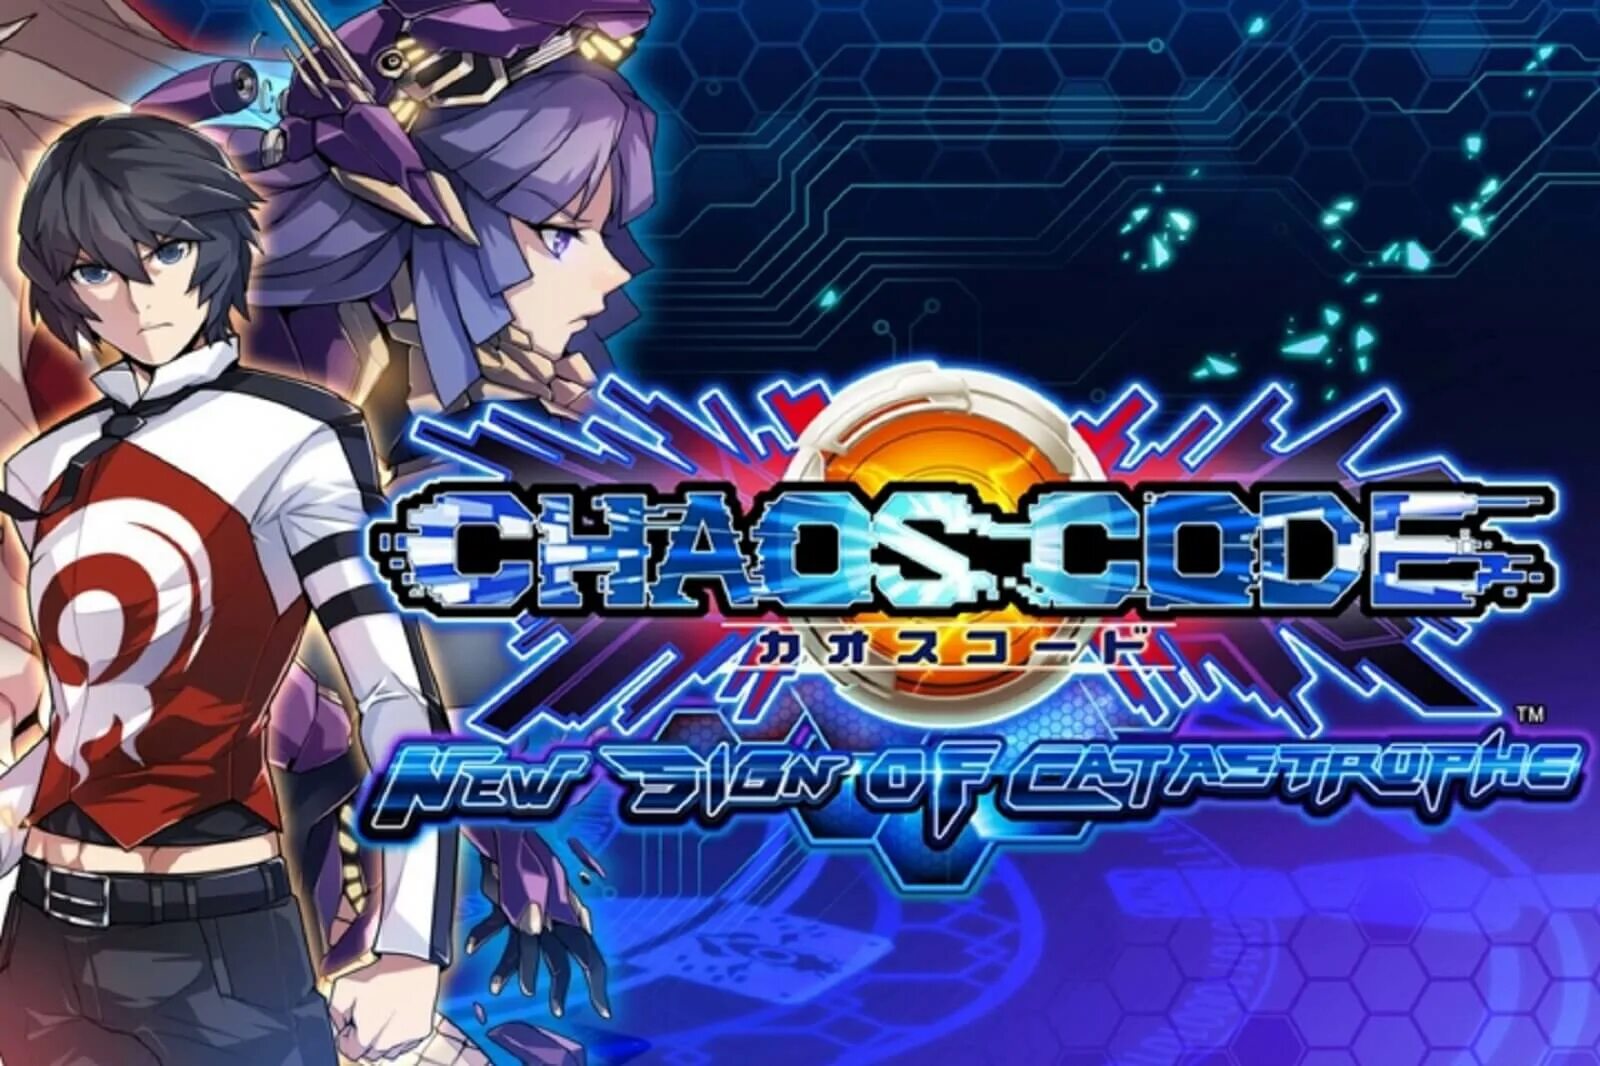 Code new worlds. Chaos code. Chaos code New sign of Catastrophe. Макина хаос. Chaos code PC.